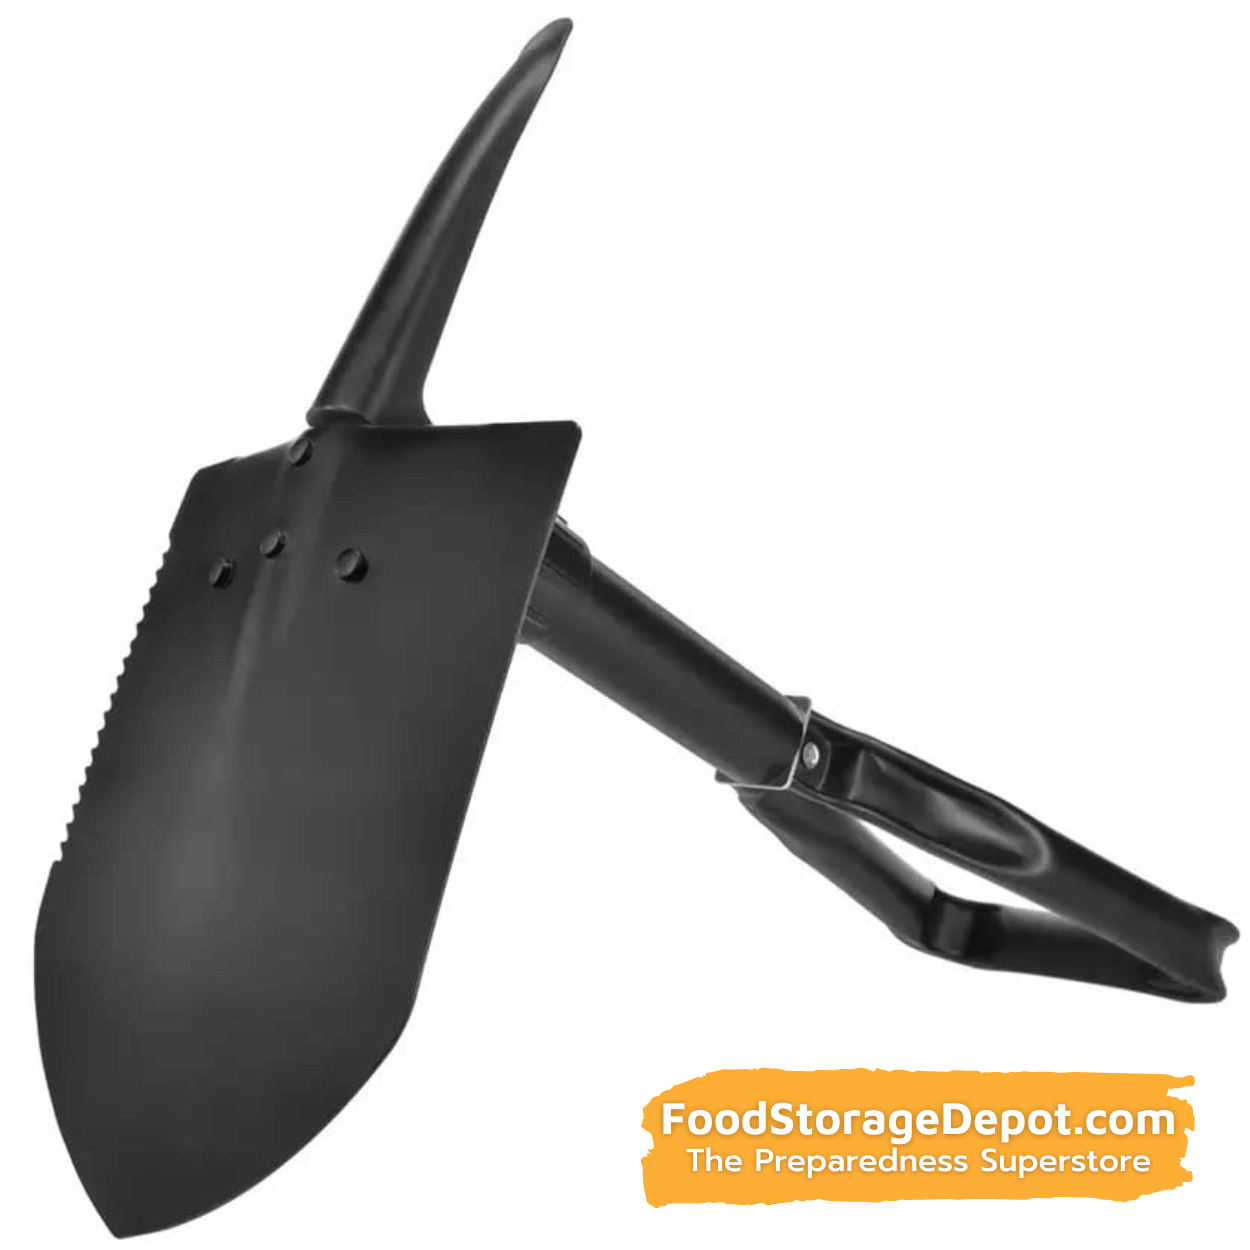 Tri-Fold Serrated Shovel with Carrying Case (23")